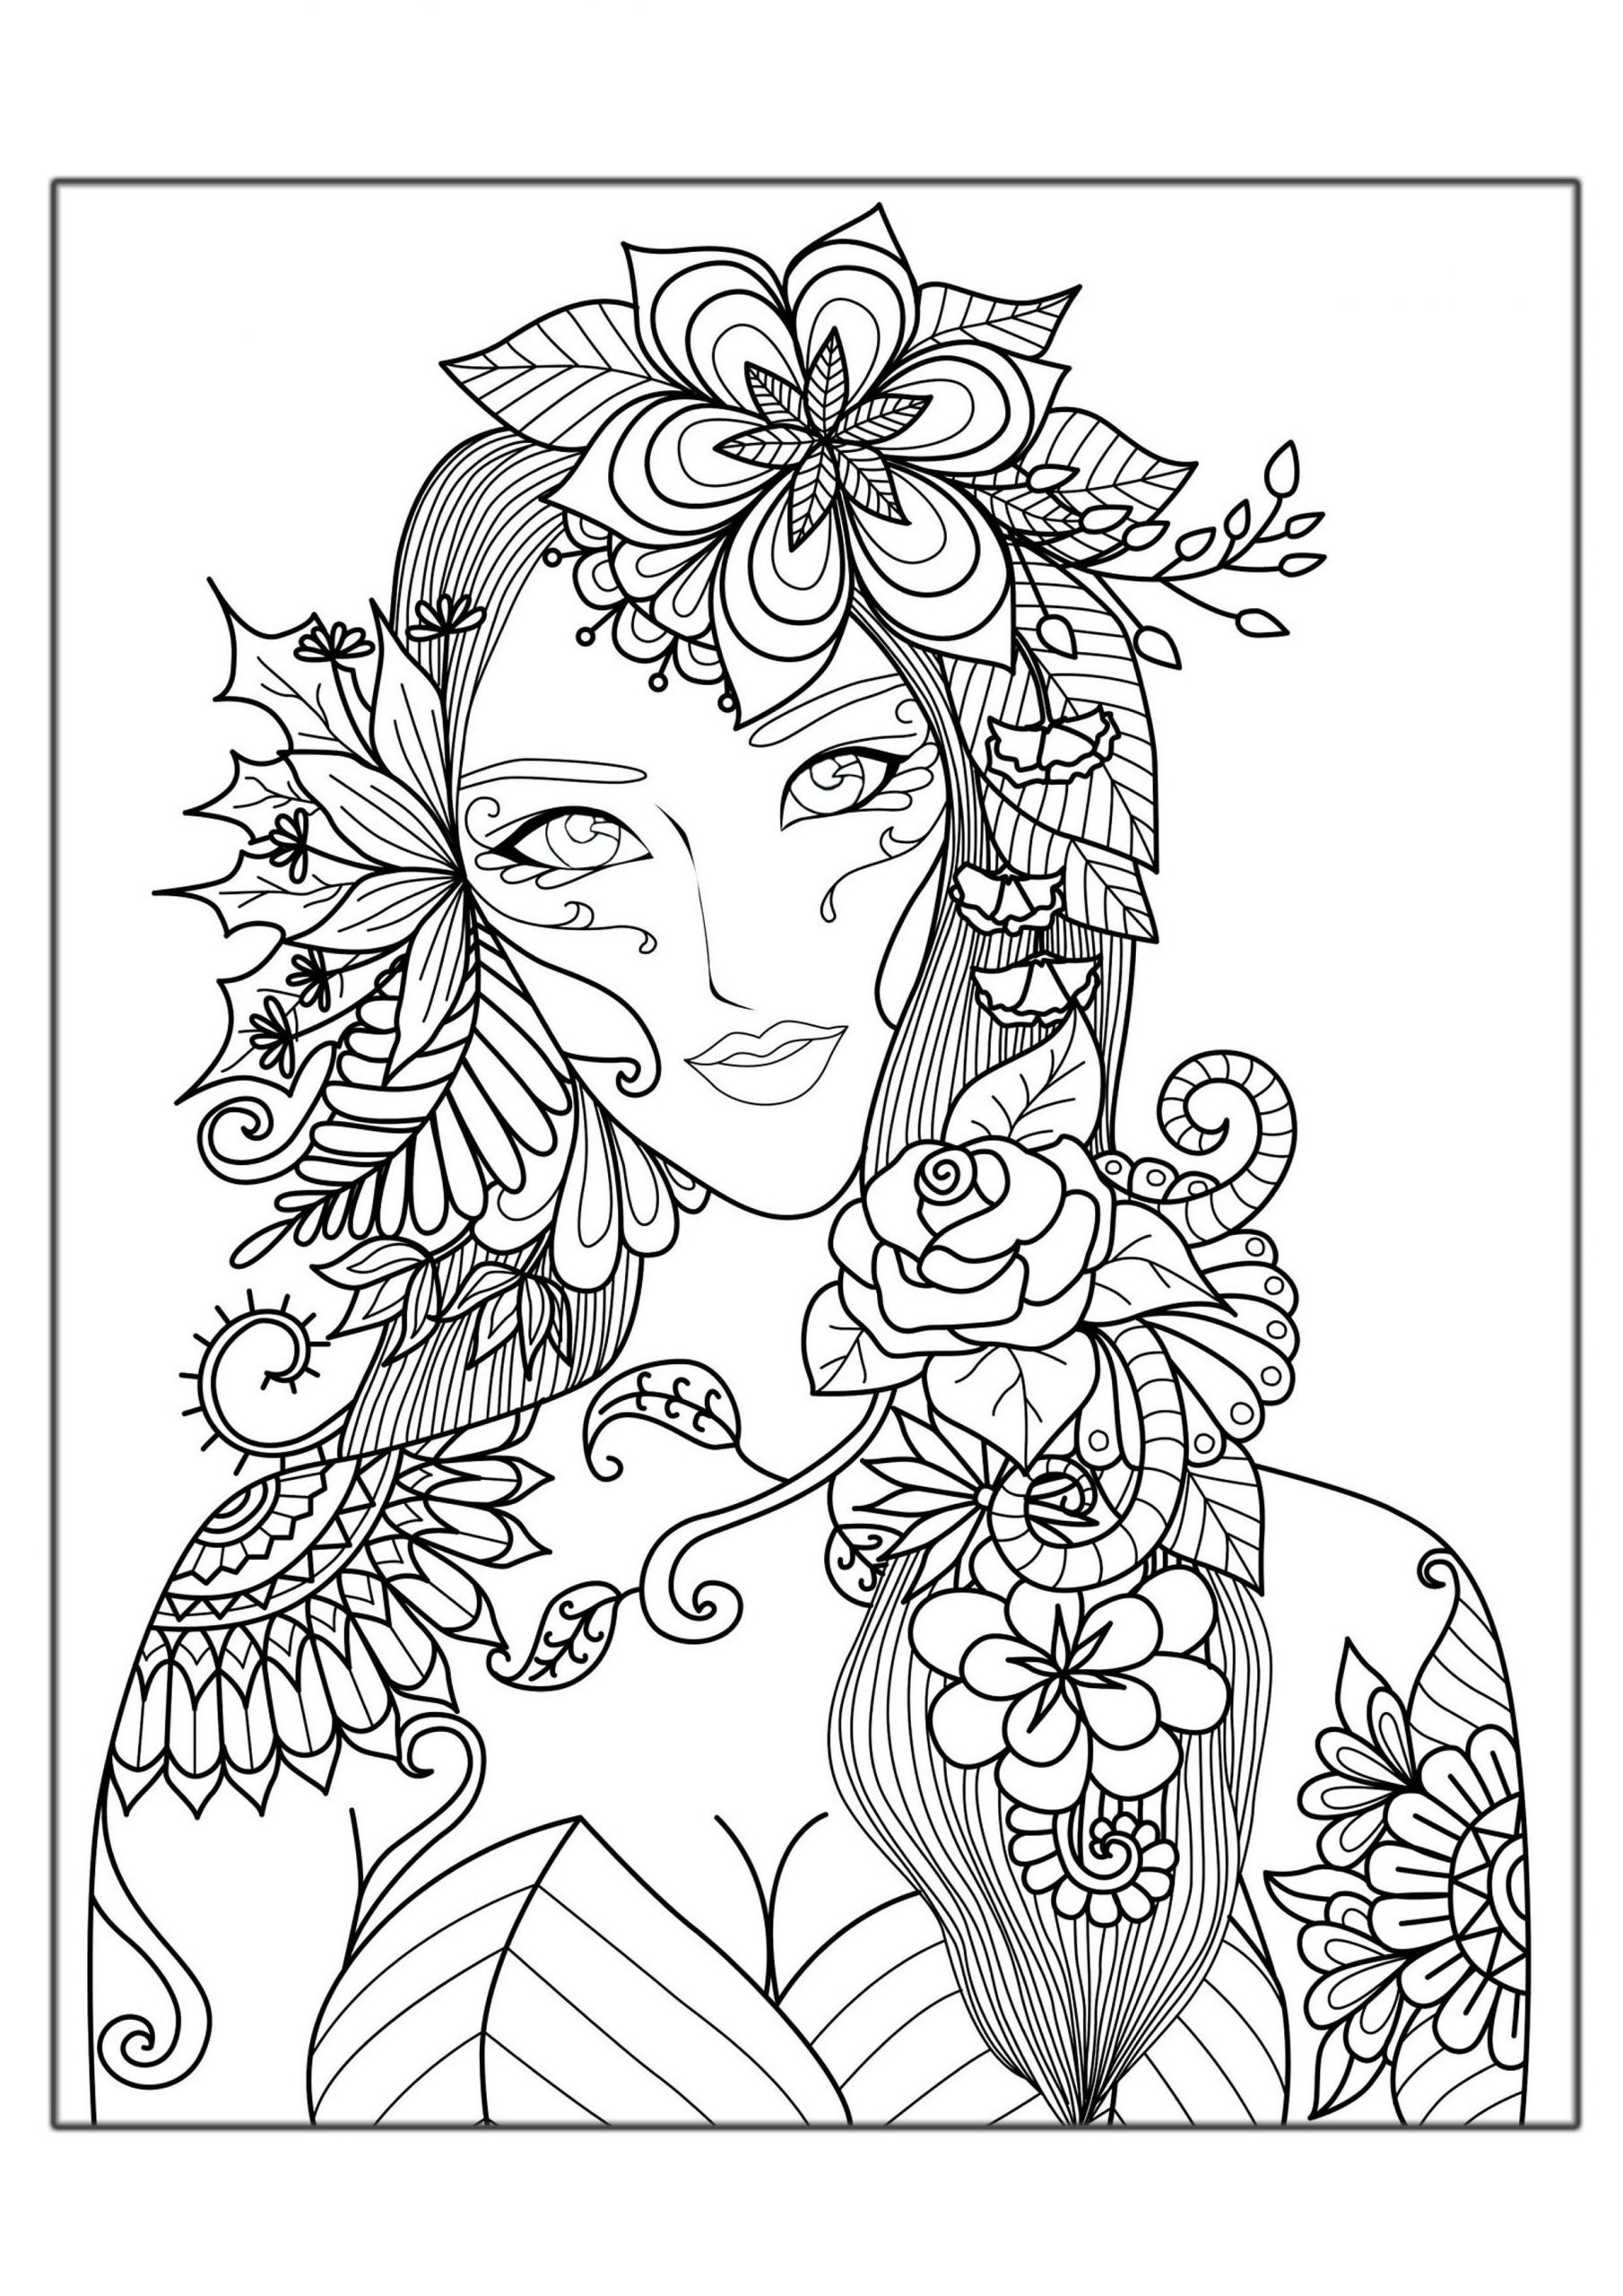 Coloring Sheets For Adults Printable
 Fall Coloring Pages for Adults Best Coloring Pages For Kids